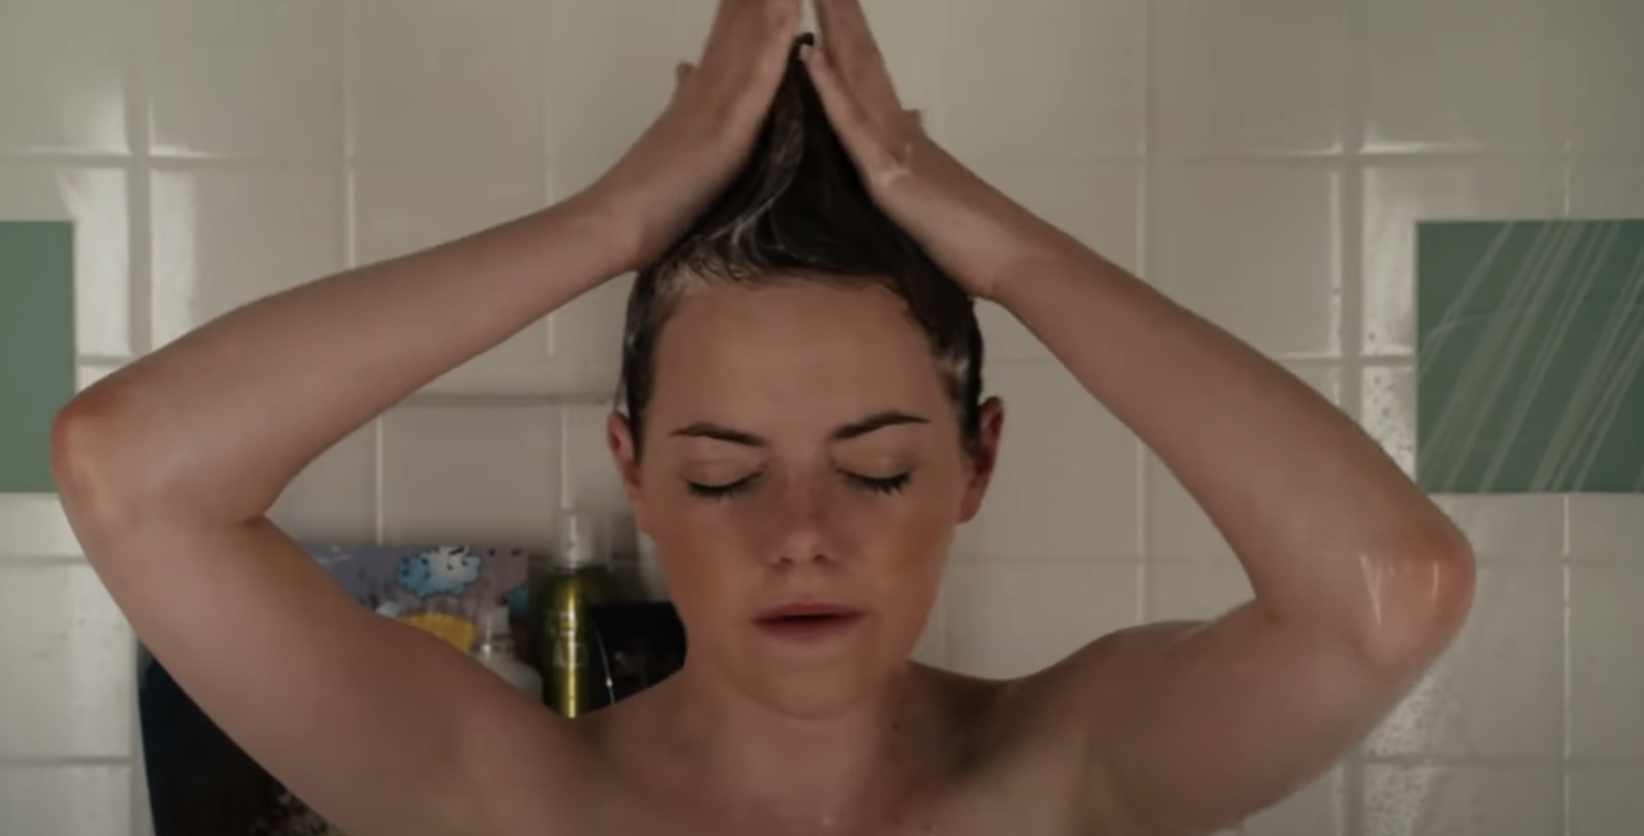 Emma Stone showering and washing her hair